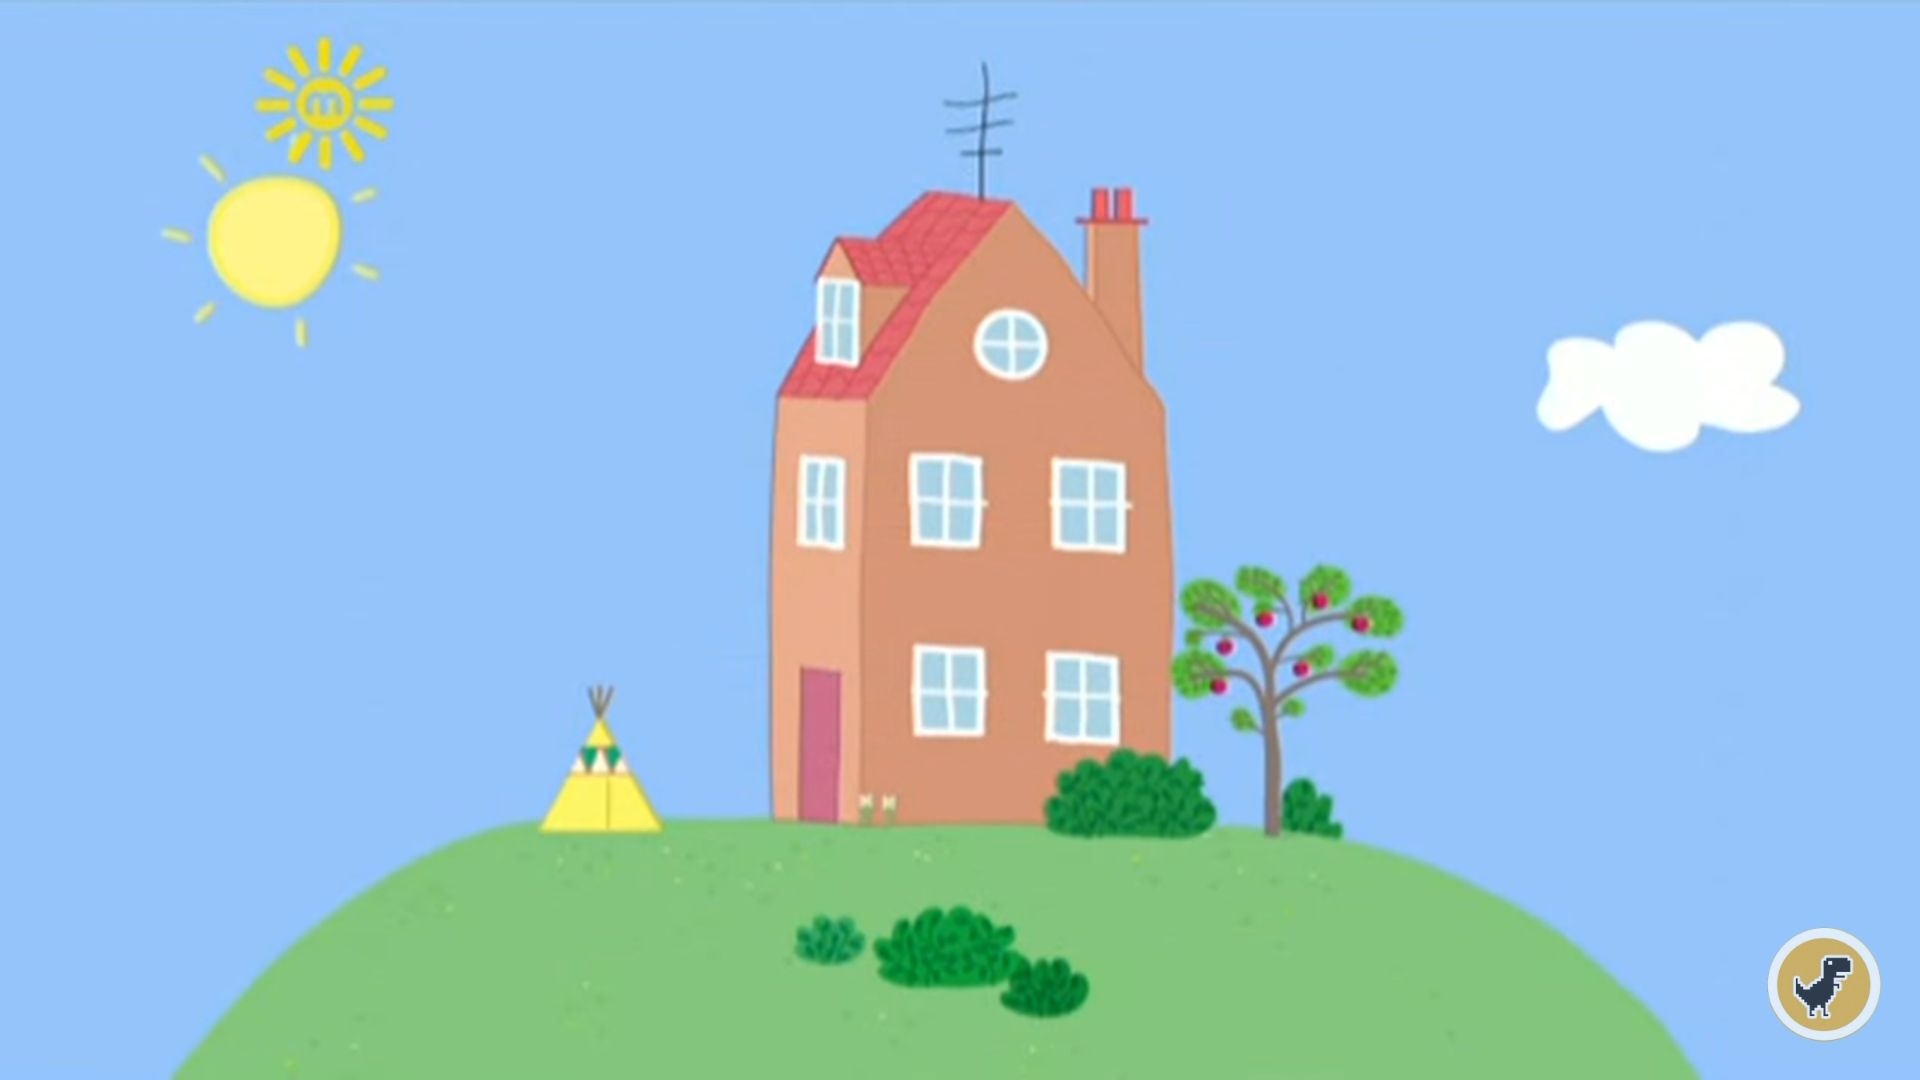 Peppa Pig House Wallpapers   Top Peppa Pig House Backgrounds 1920x1080